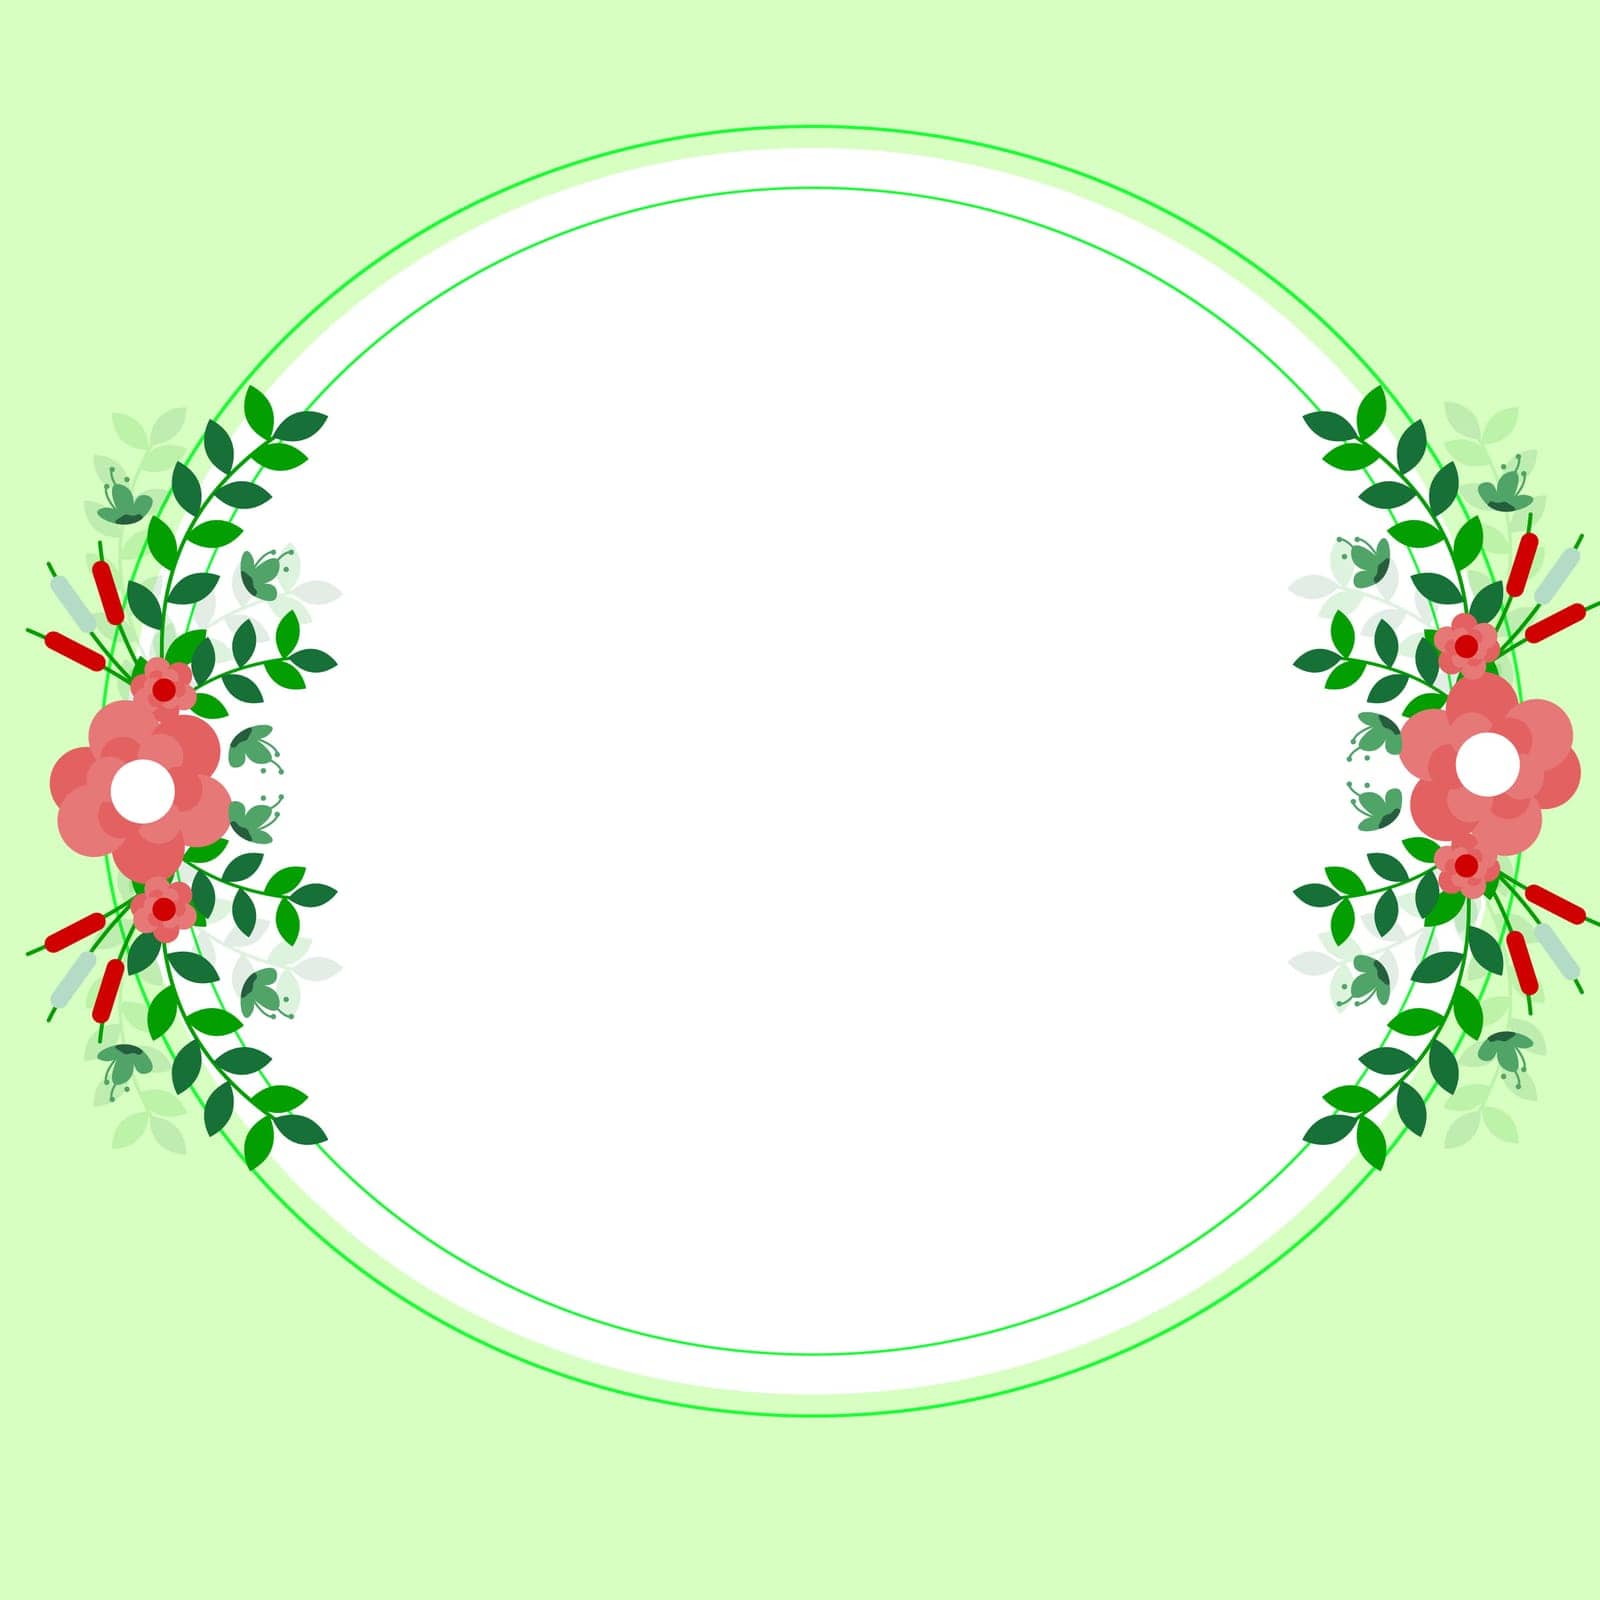 Circle Shape Text Frame Surrounded With Assorted Flowers Hearts And Leaves.